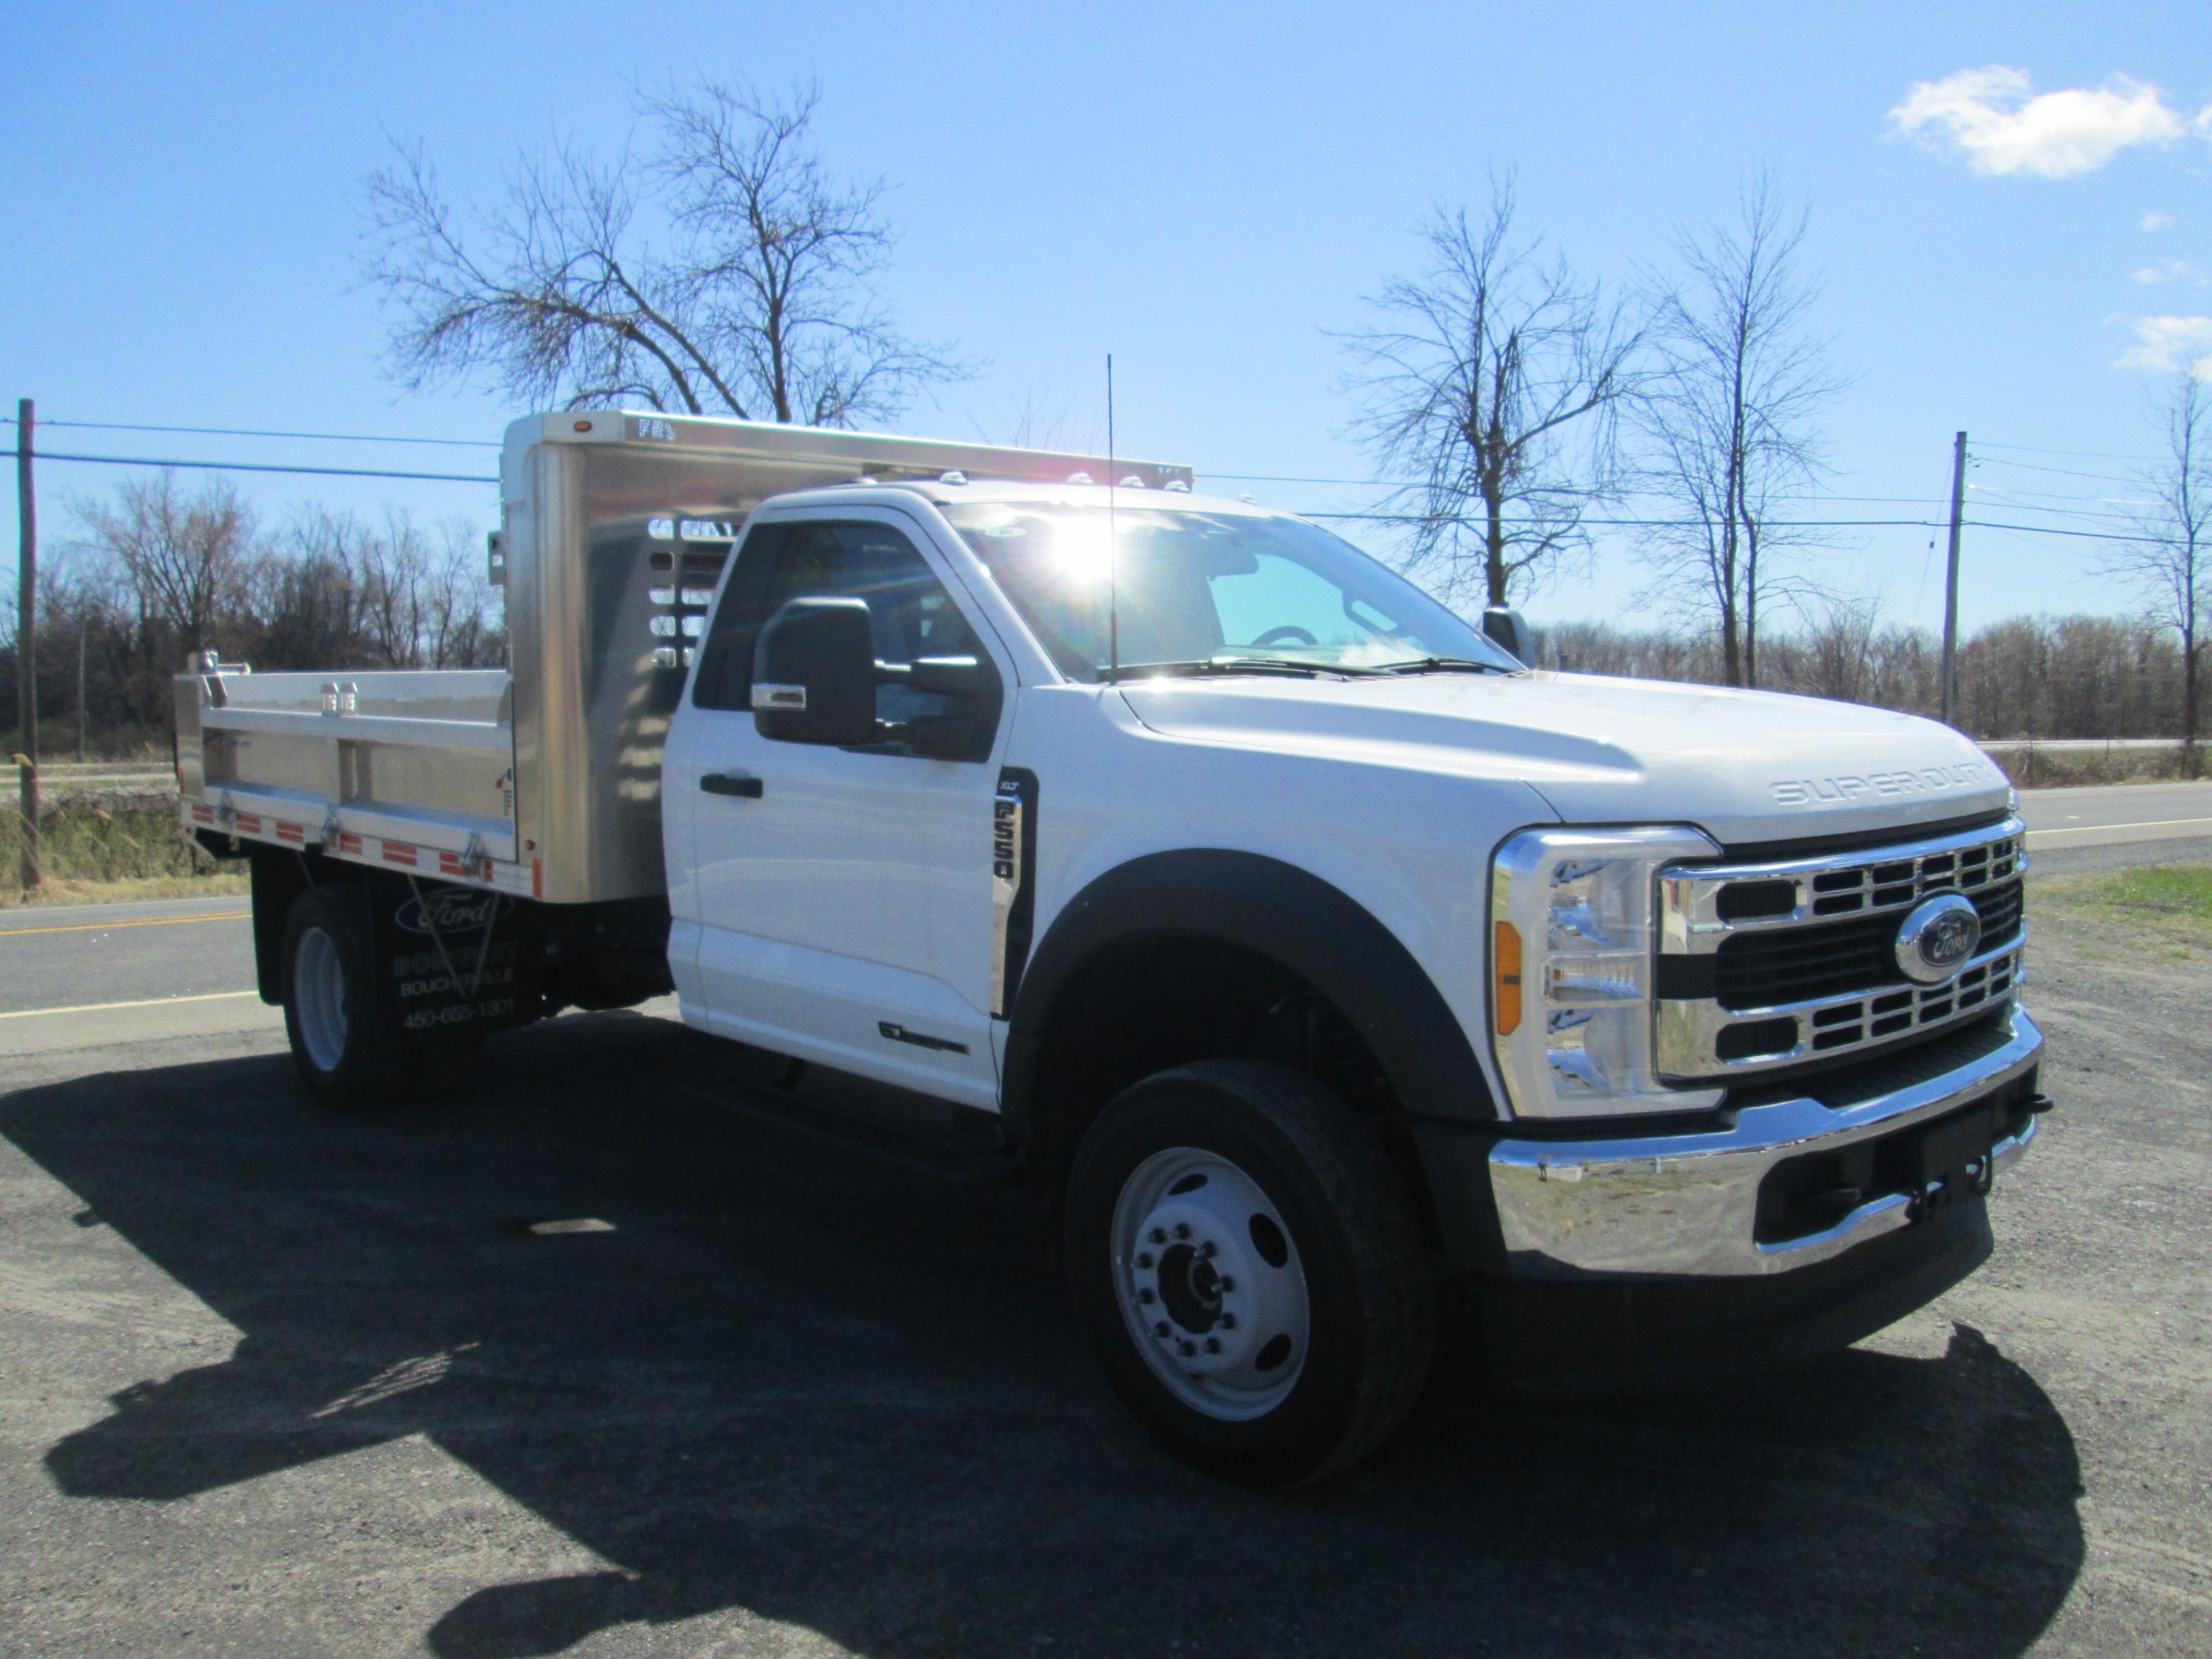 DUMP TRUCK NEW 2023 Ford F550 4x4 S/A dump Truck SN 1FDUF5HT4PEC82759, equipped with 6.7 diesel